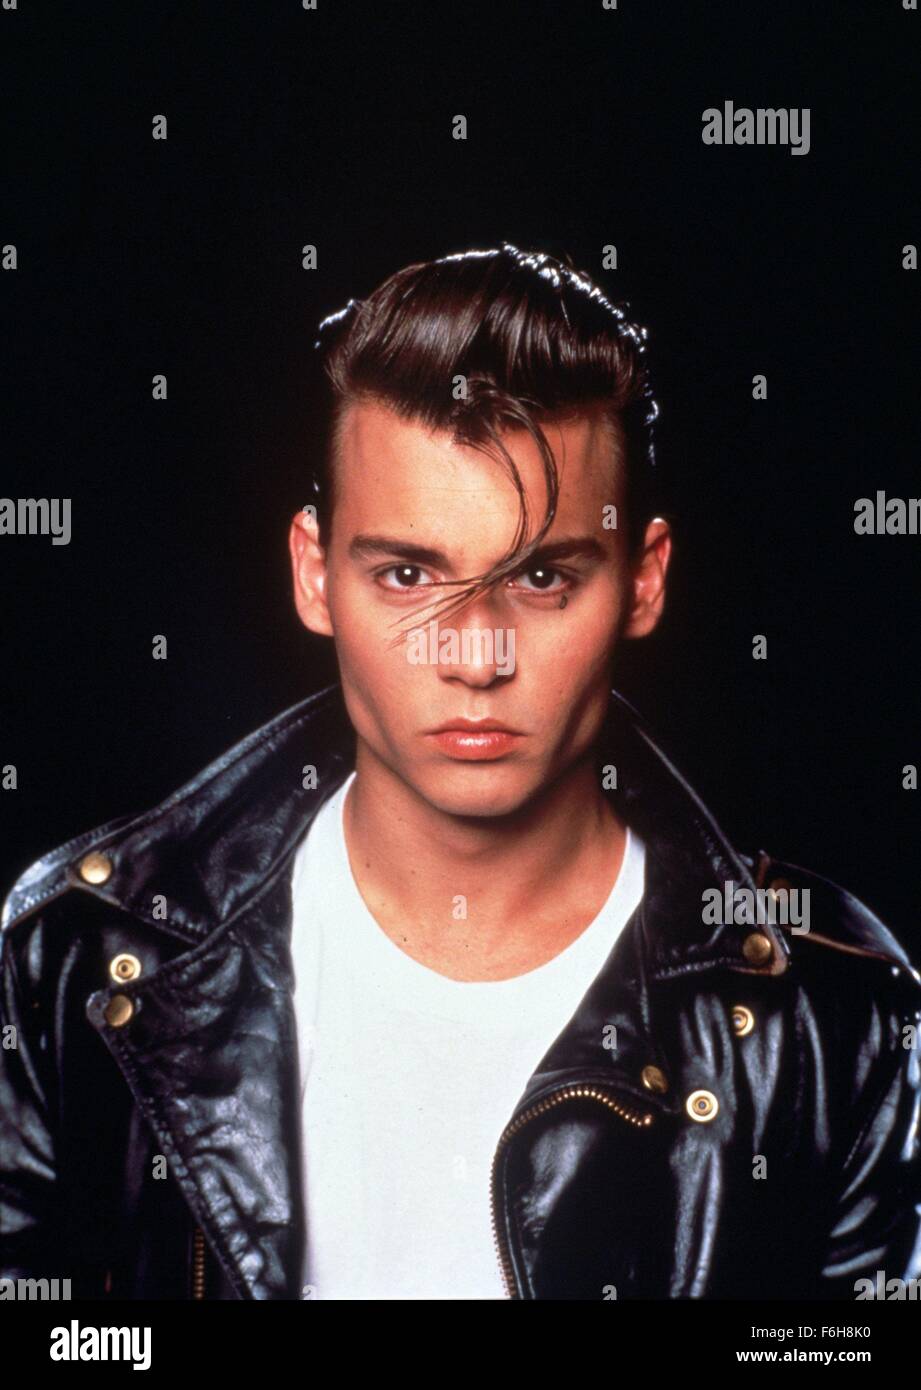 RELEASE DATE: April 6, 1990   MOVIE TITLE: Cry-Baby  STUDIO: Universal Pictures   DIRECTOR: John Waters   PLOT: In 1950s Baltimore, a bad-boy with a heart of gold wins the love of a good-girl, whose boyfriend sets out for revenge.   PICTURED: JOHNNY DEPP.   (Credit Image: c Universal Pictures/Entertainment Pictures) Stock Photo